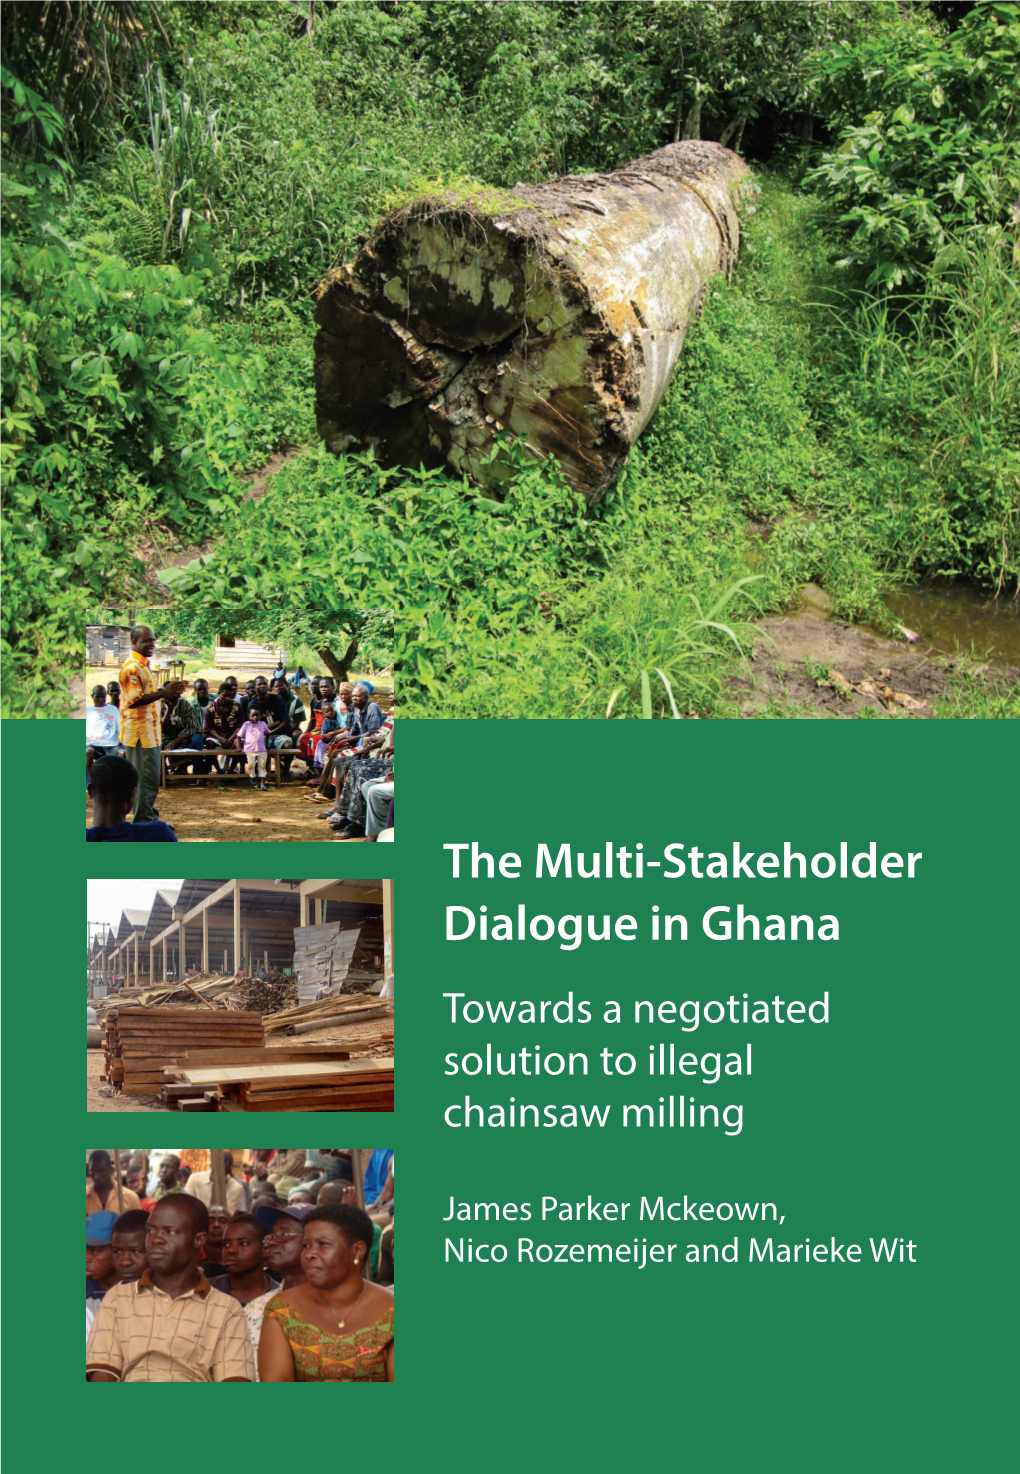 The Multi-Stakeholder Dialogue in Ghana Towards a Negotiated Solution to Illegal Chainsaw Milling